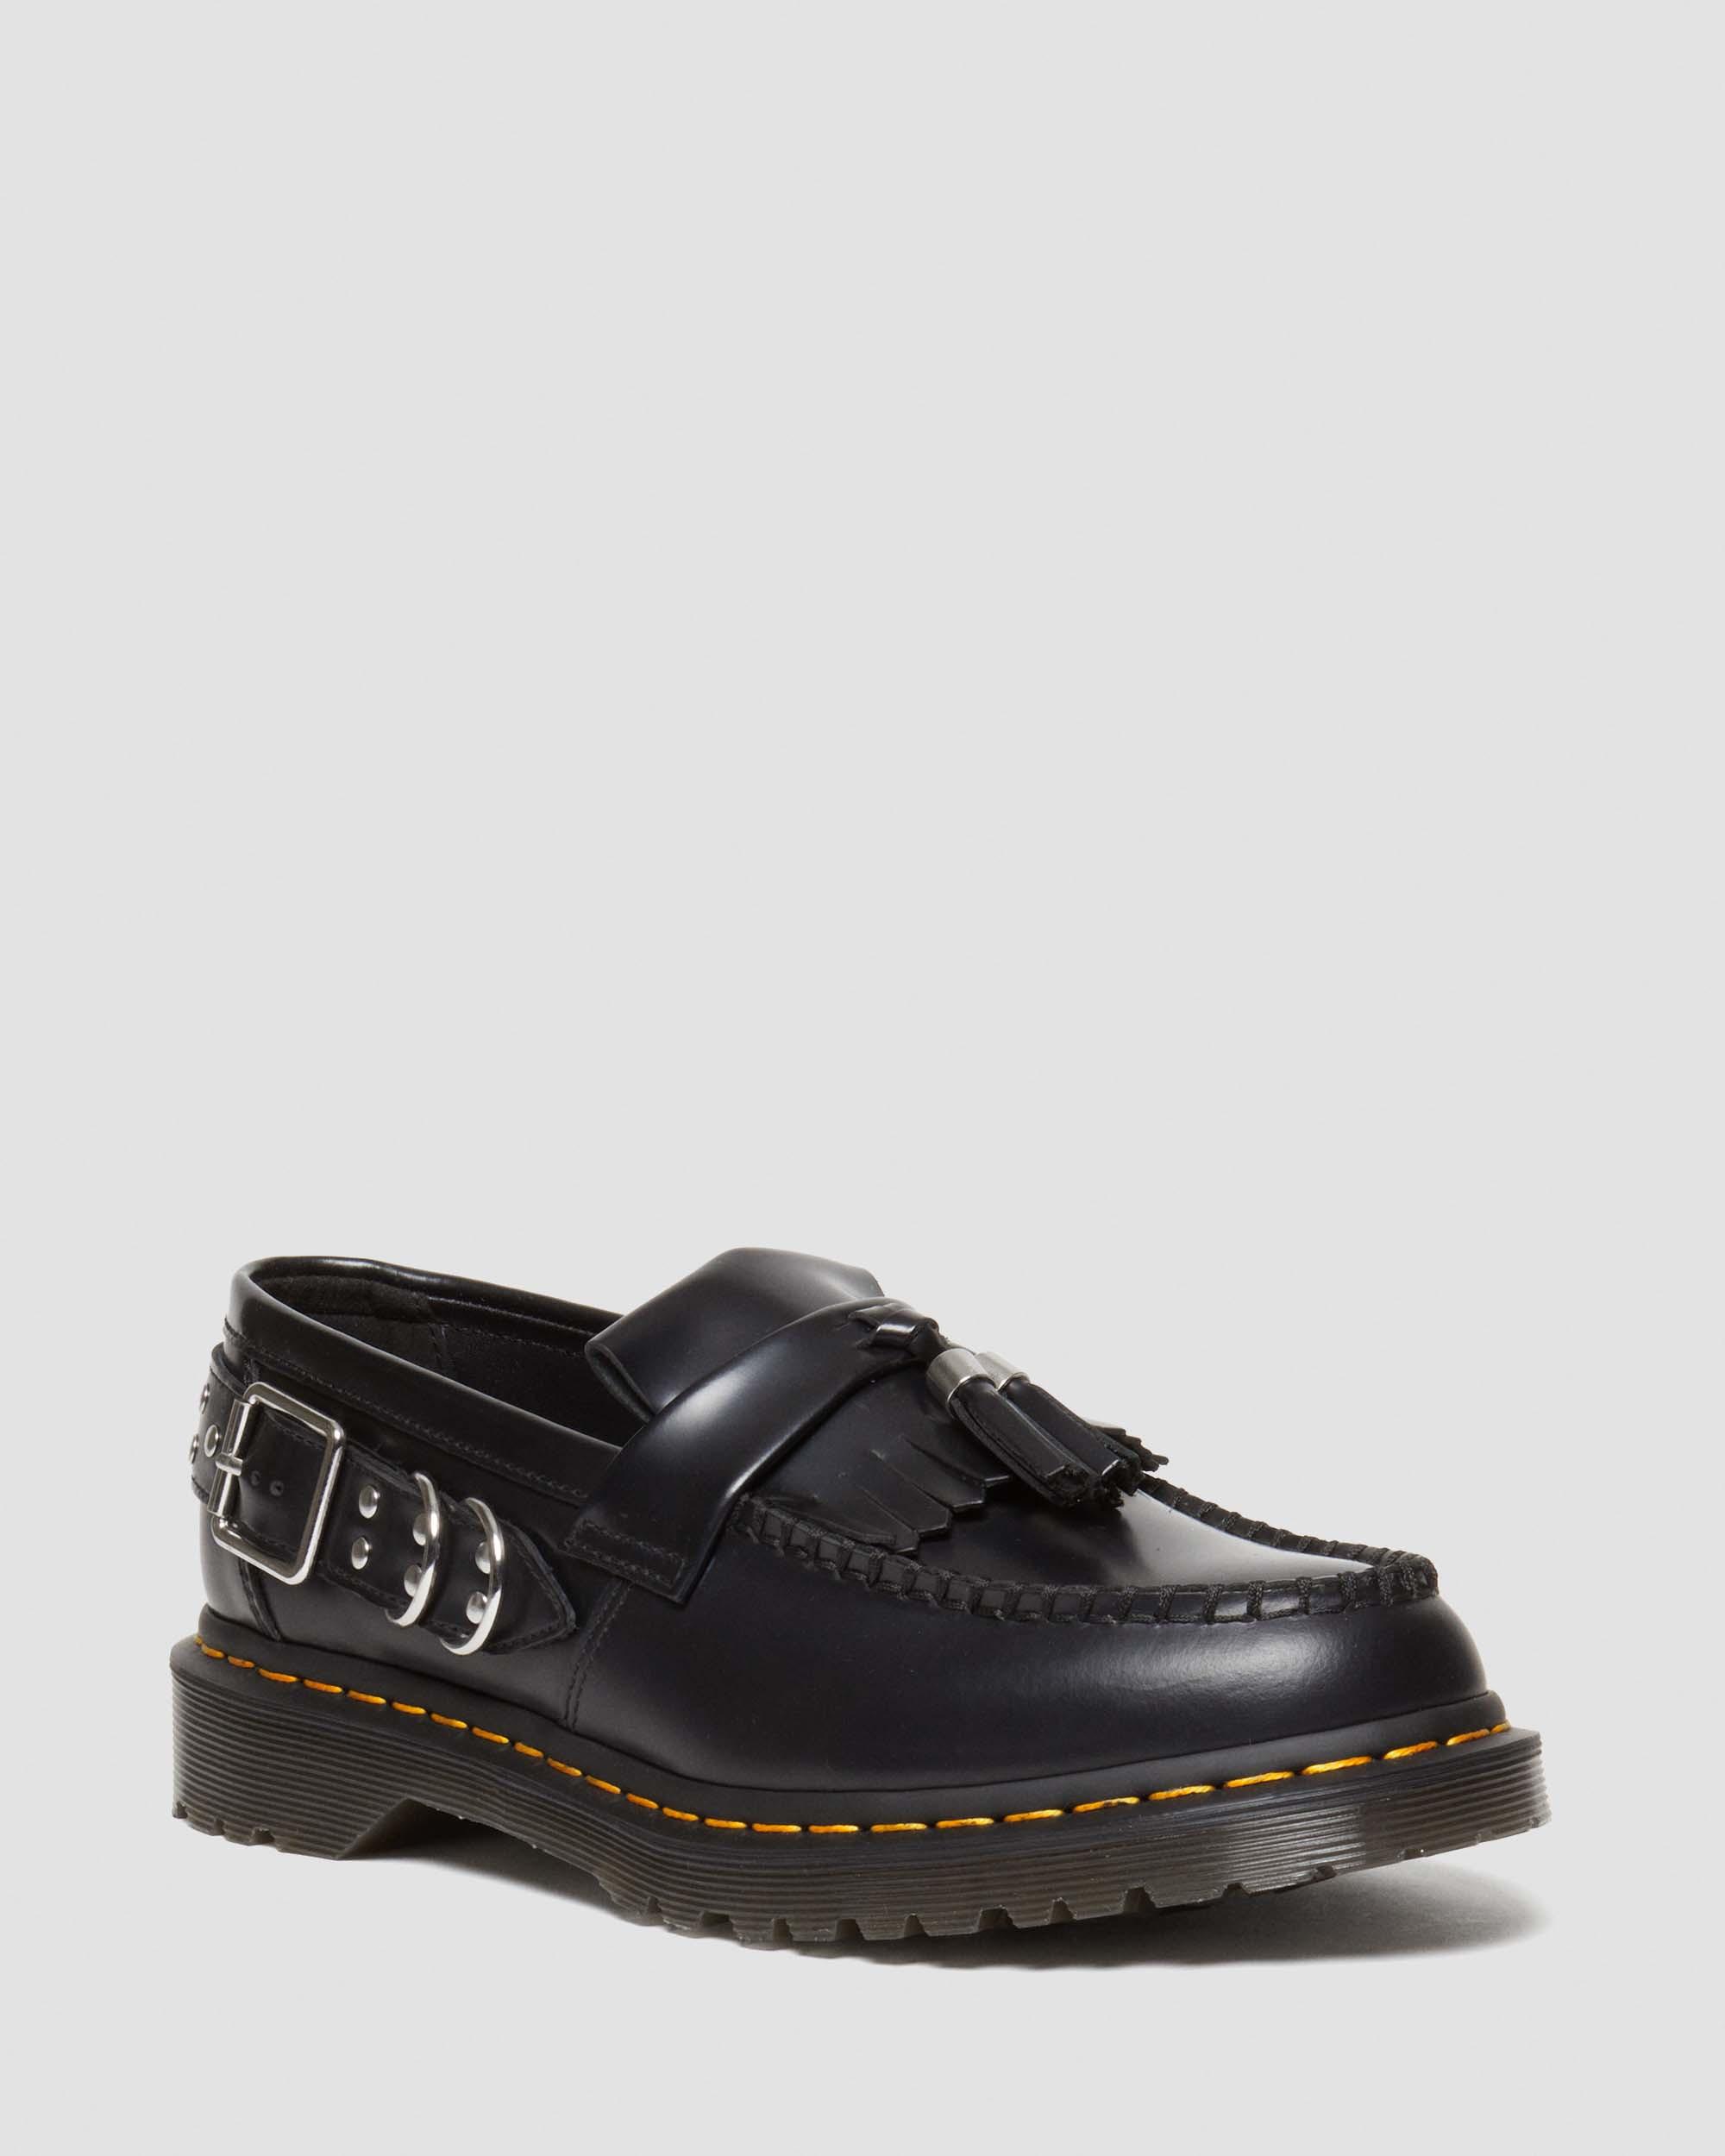 Adrian Hardware Polished Smooth Tassel Loafers in Black